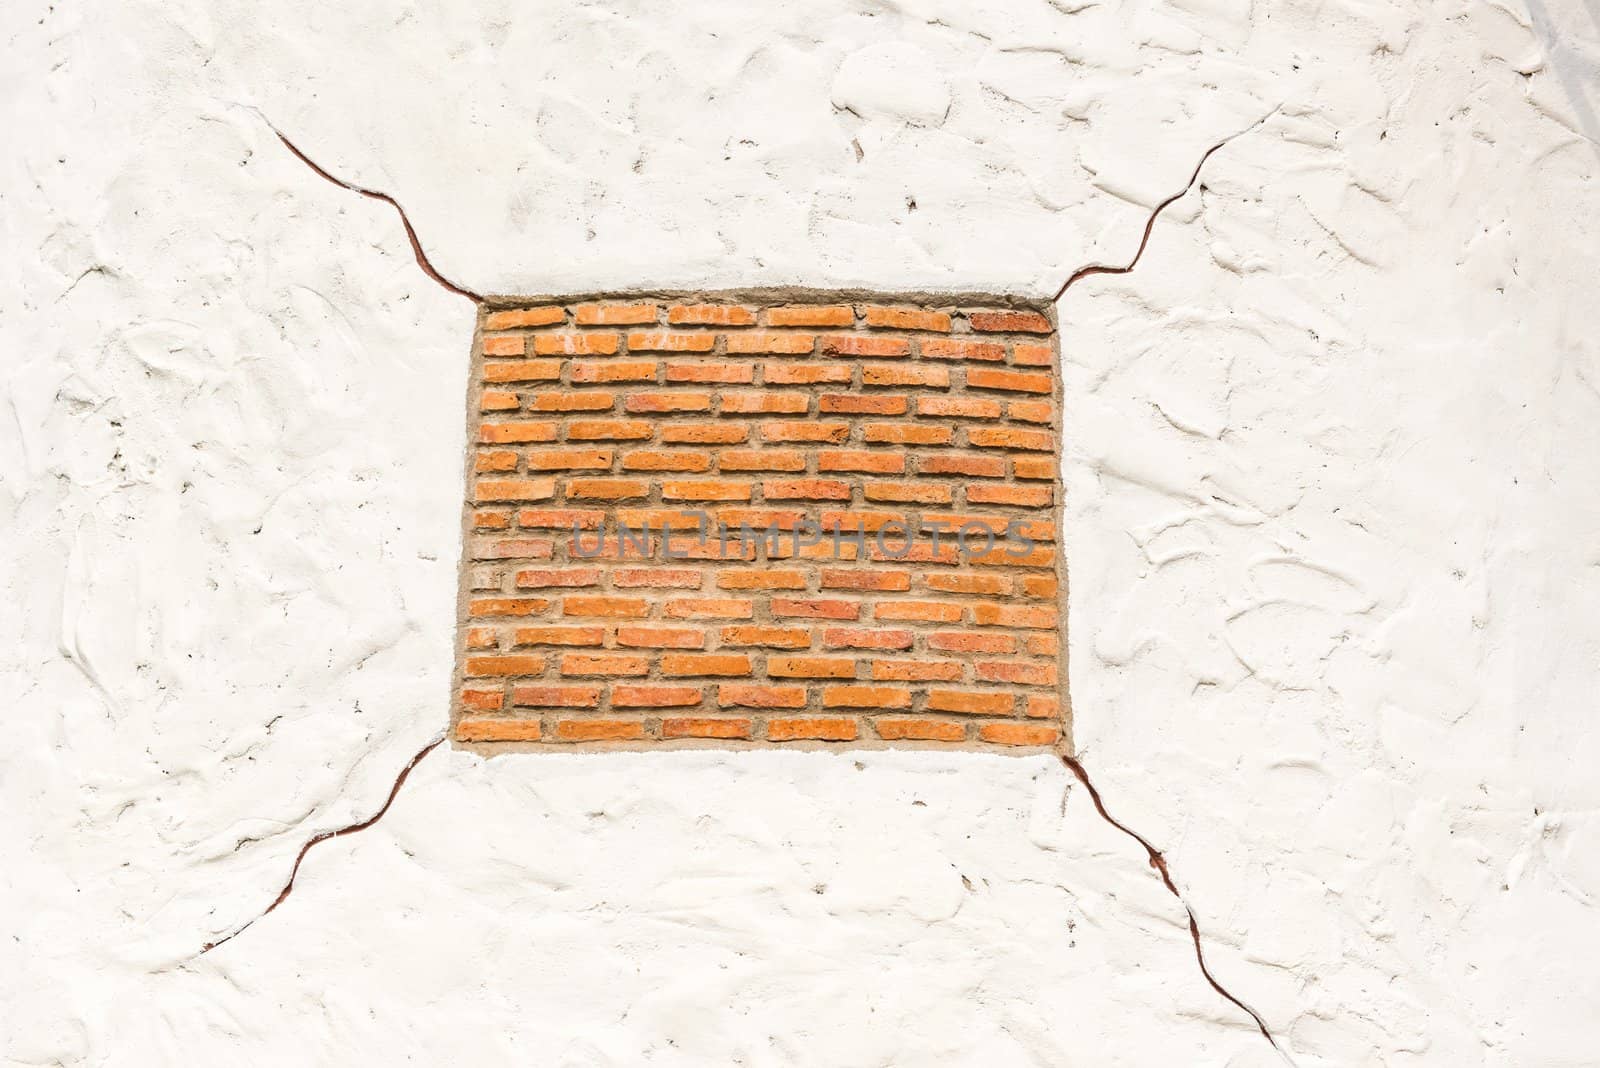 Red square shape brick on white background with cracks by sasilsolutions